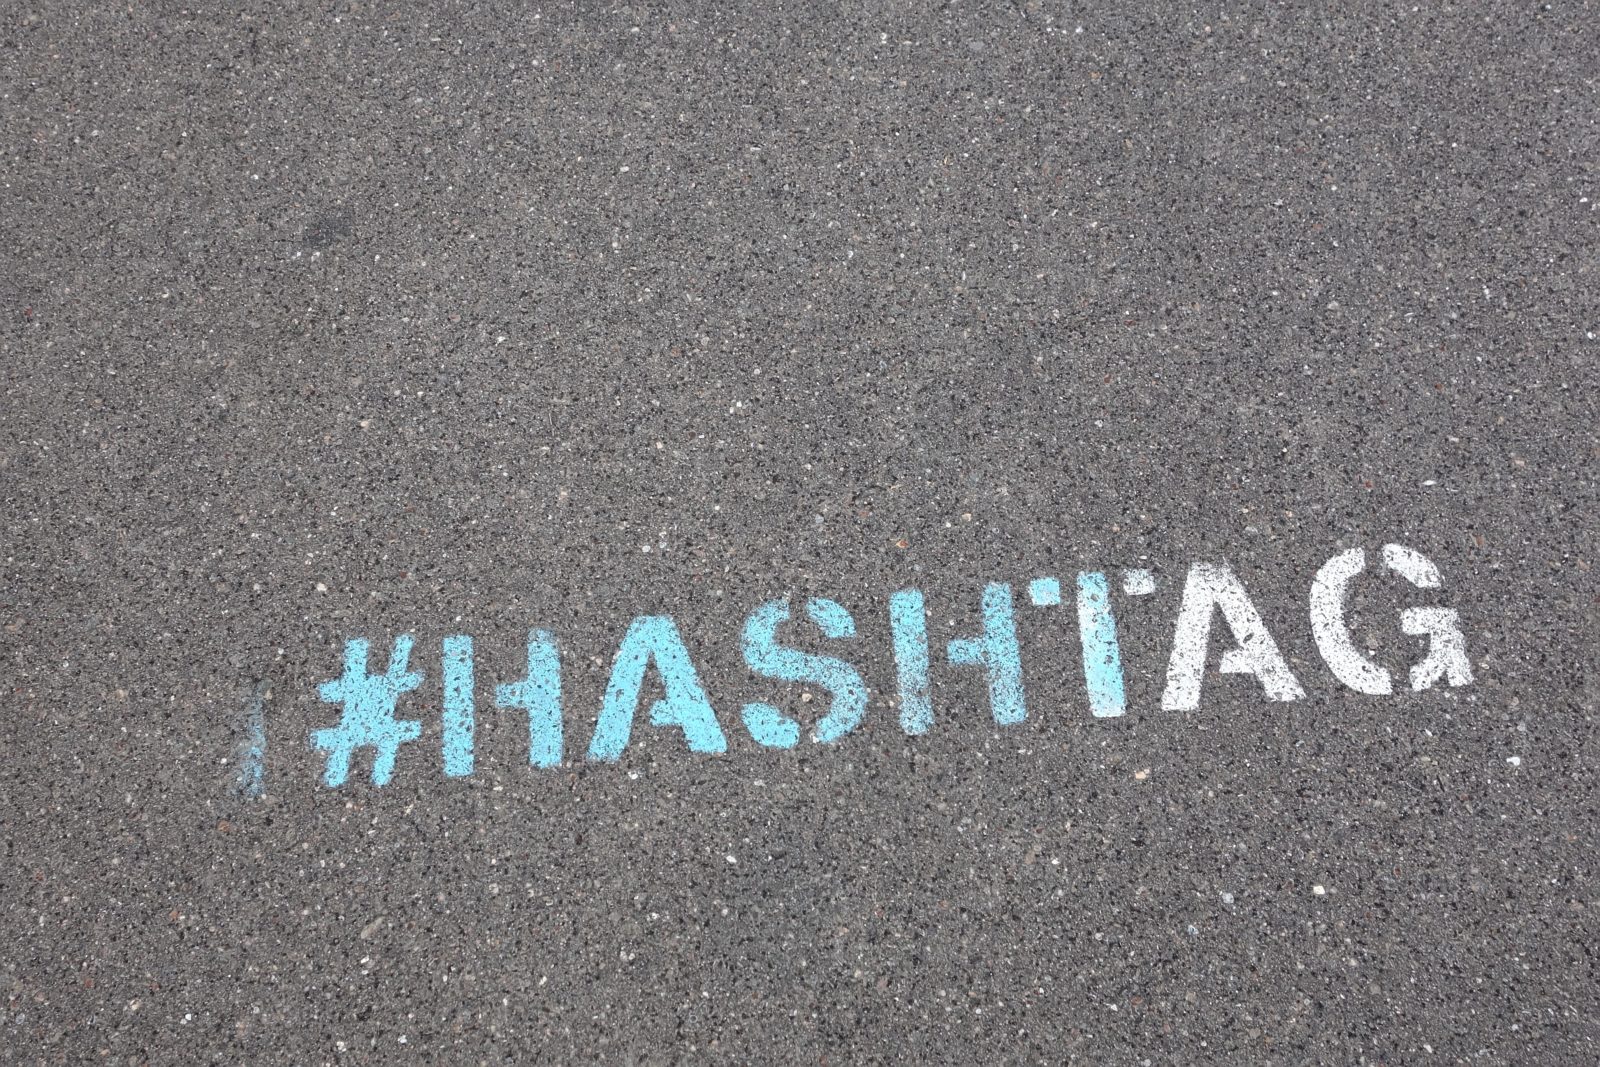 About Those #Hashtags